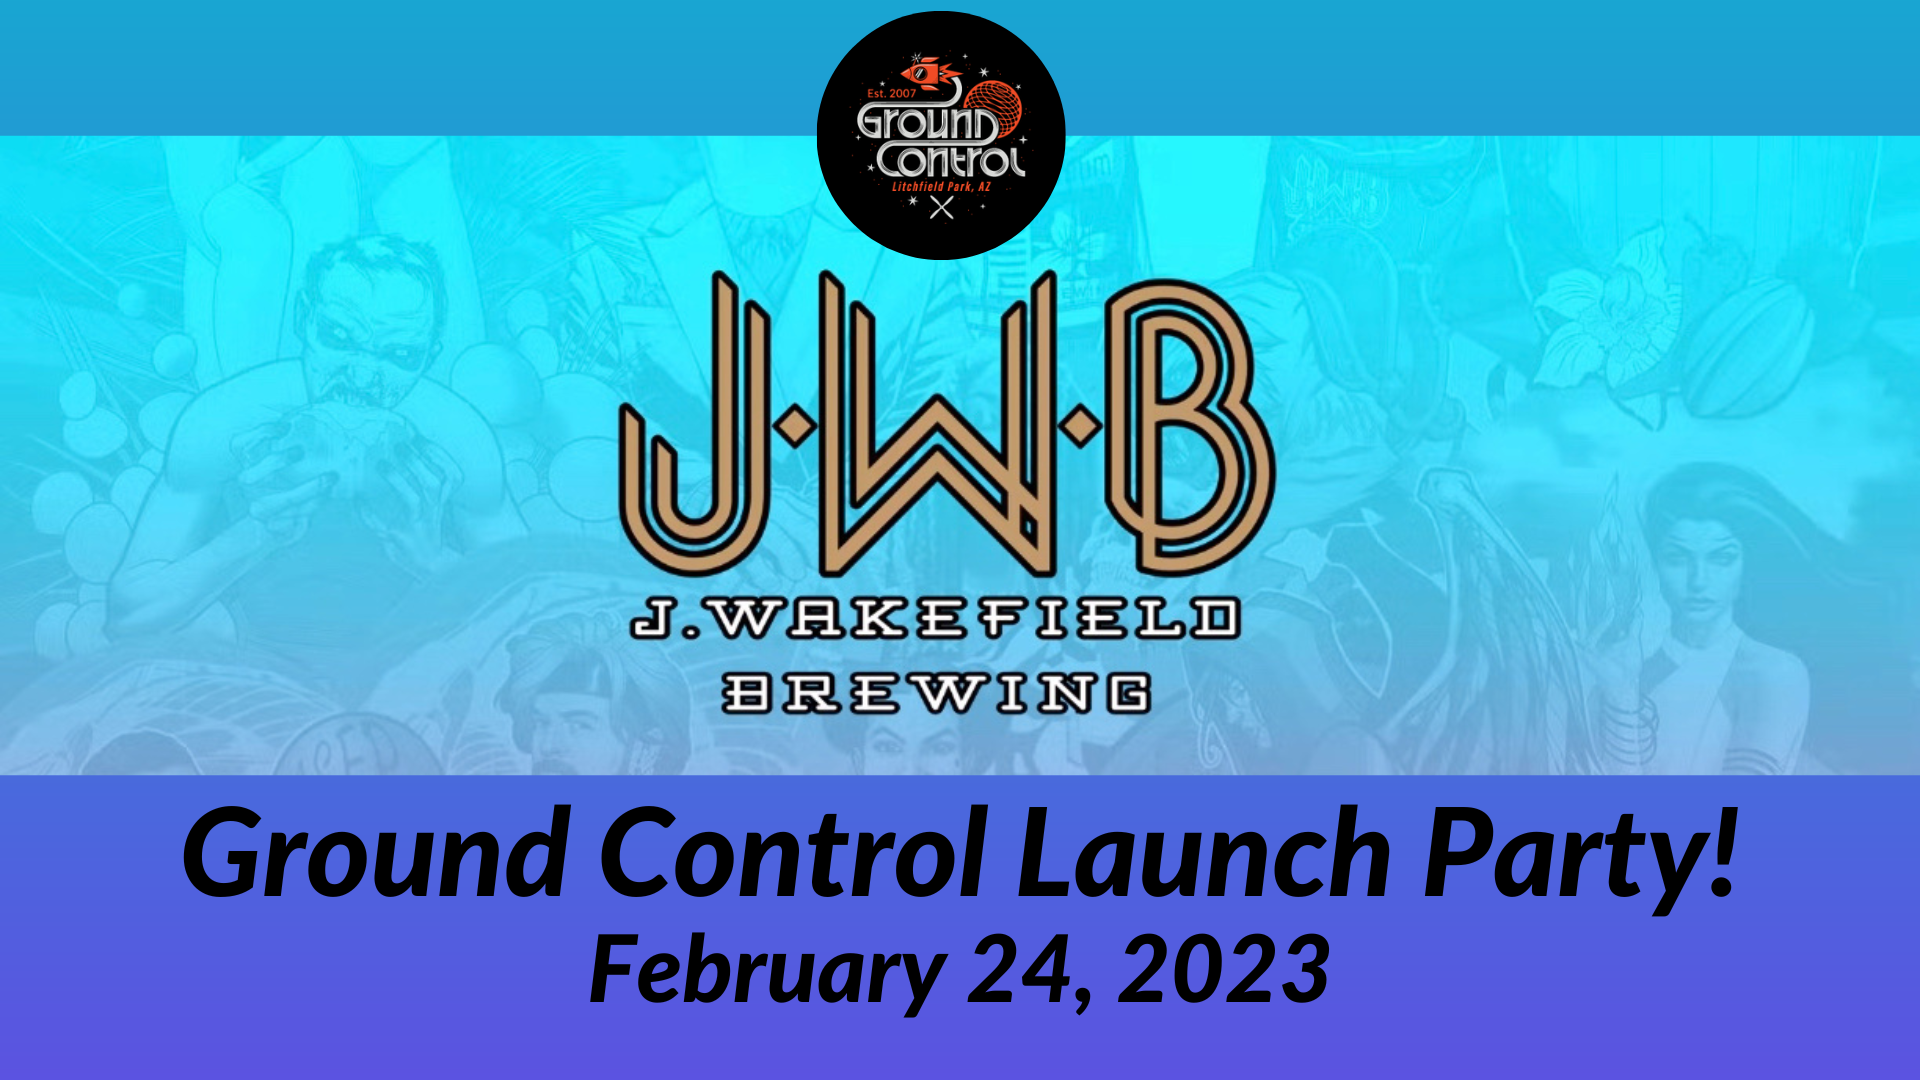 J Wakefield Brewing Launch Party!